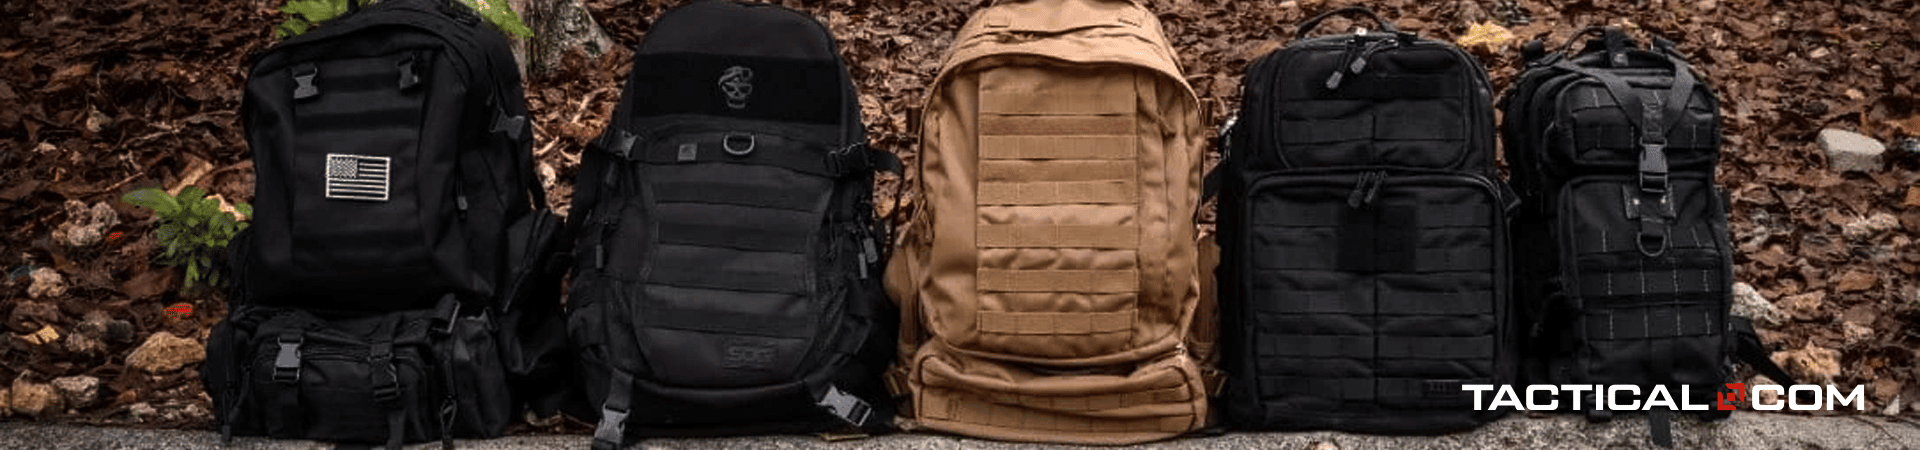 different bug out bags side by side